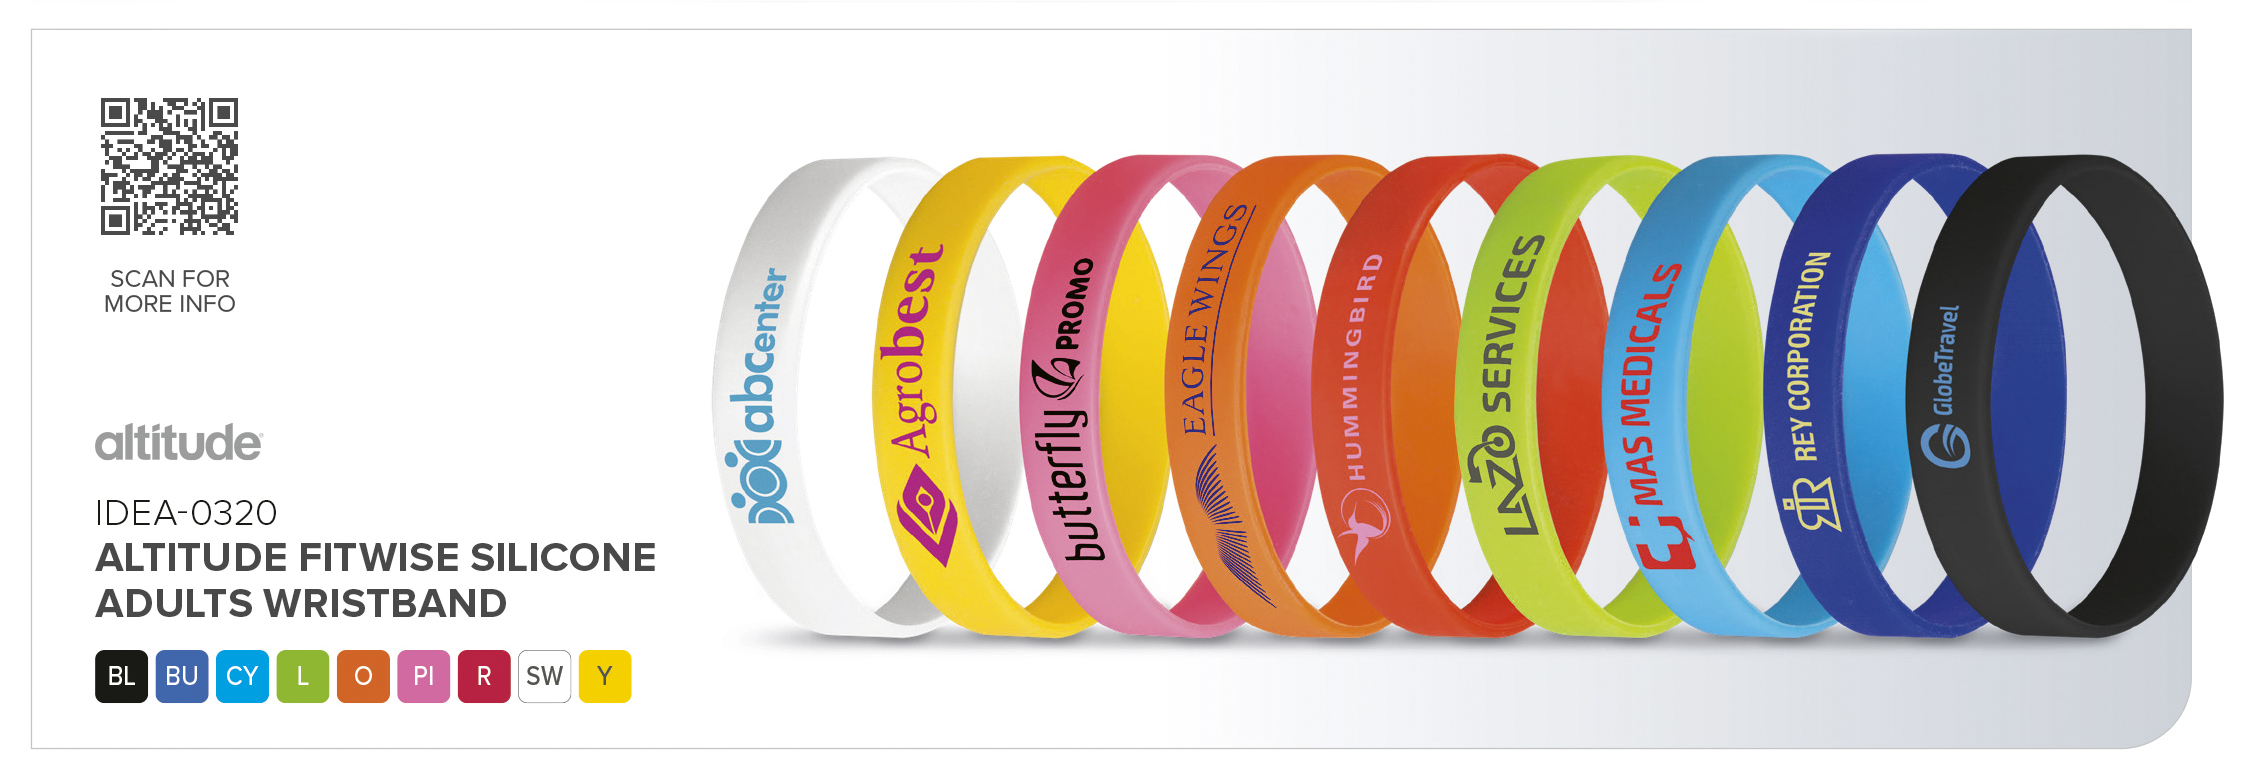 Altitude Fitwise Silicone Adults Wristband CATALOGUE_IMAGE